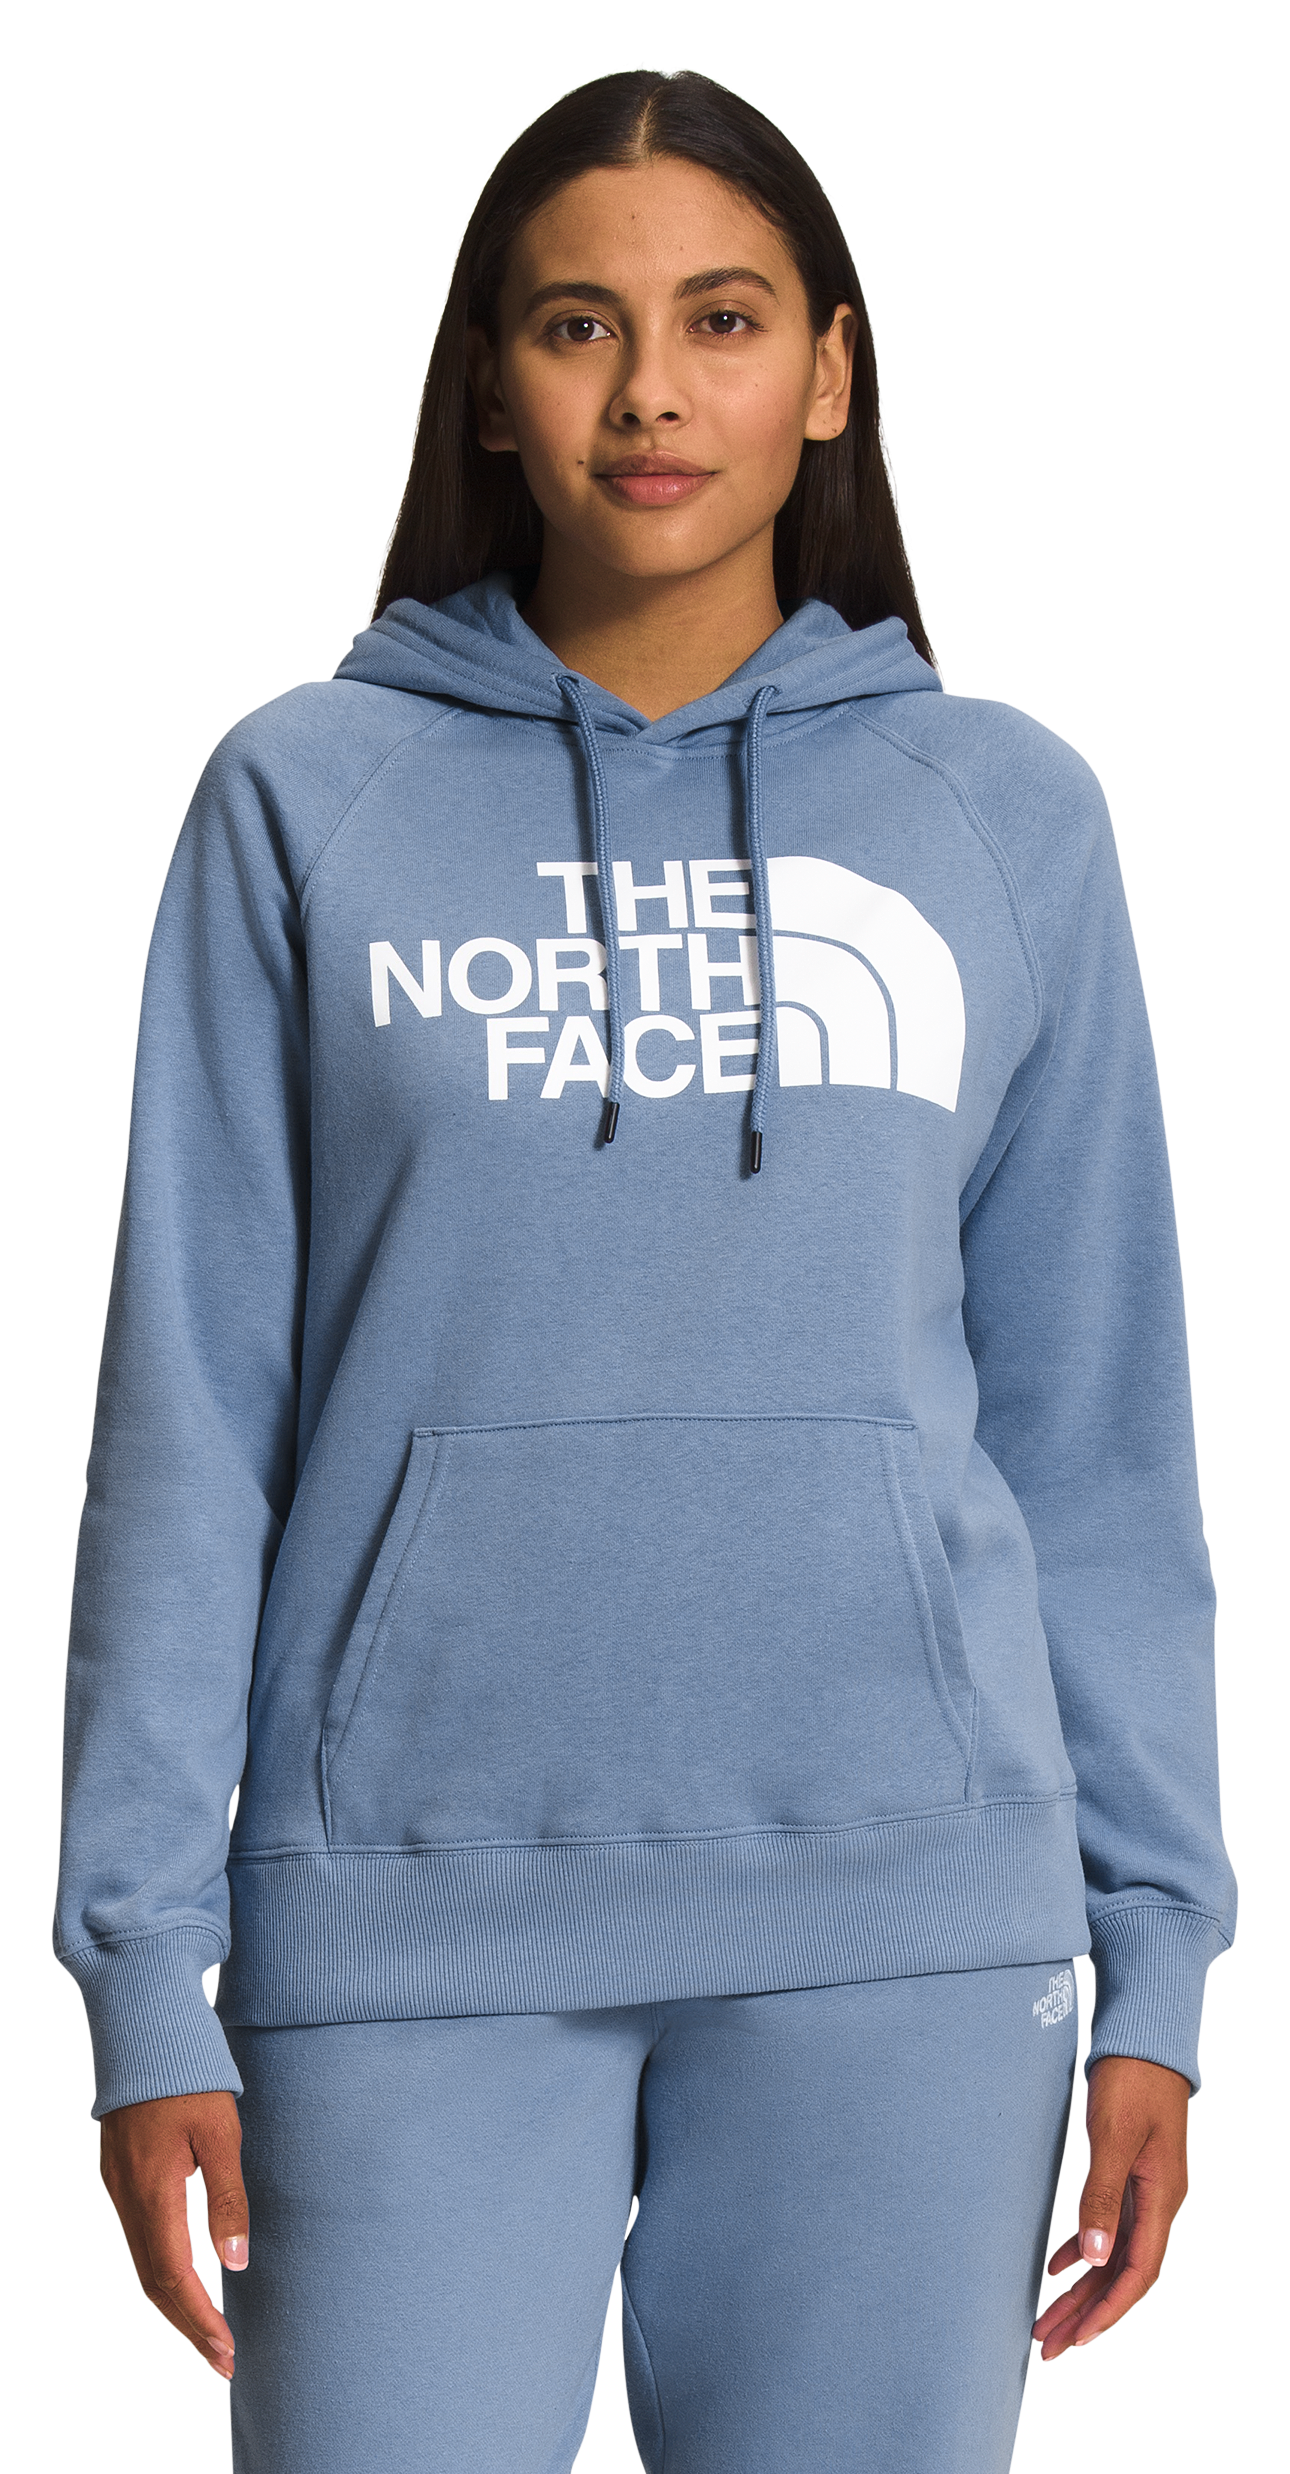 The North Face Half Dome Pullover Long-Sleeve Hoodie for Ladies - Folk Blue/TNF White - M